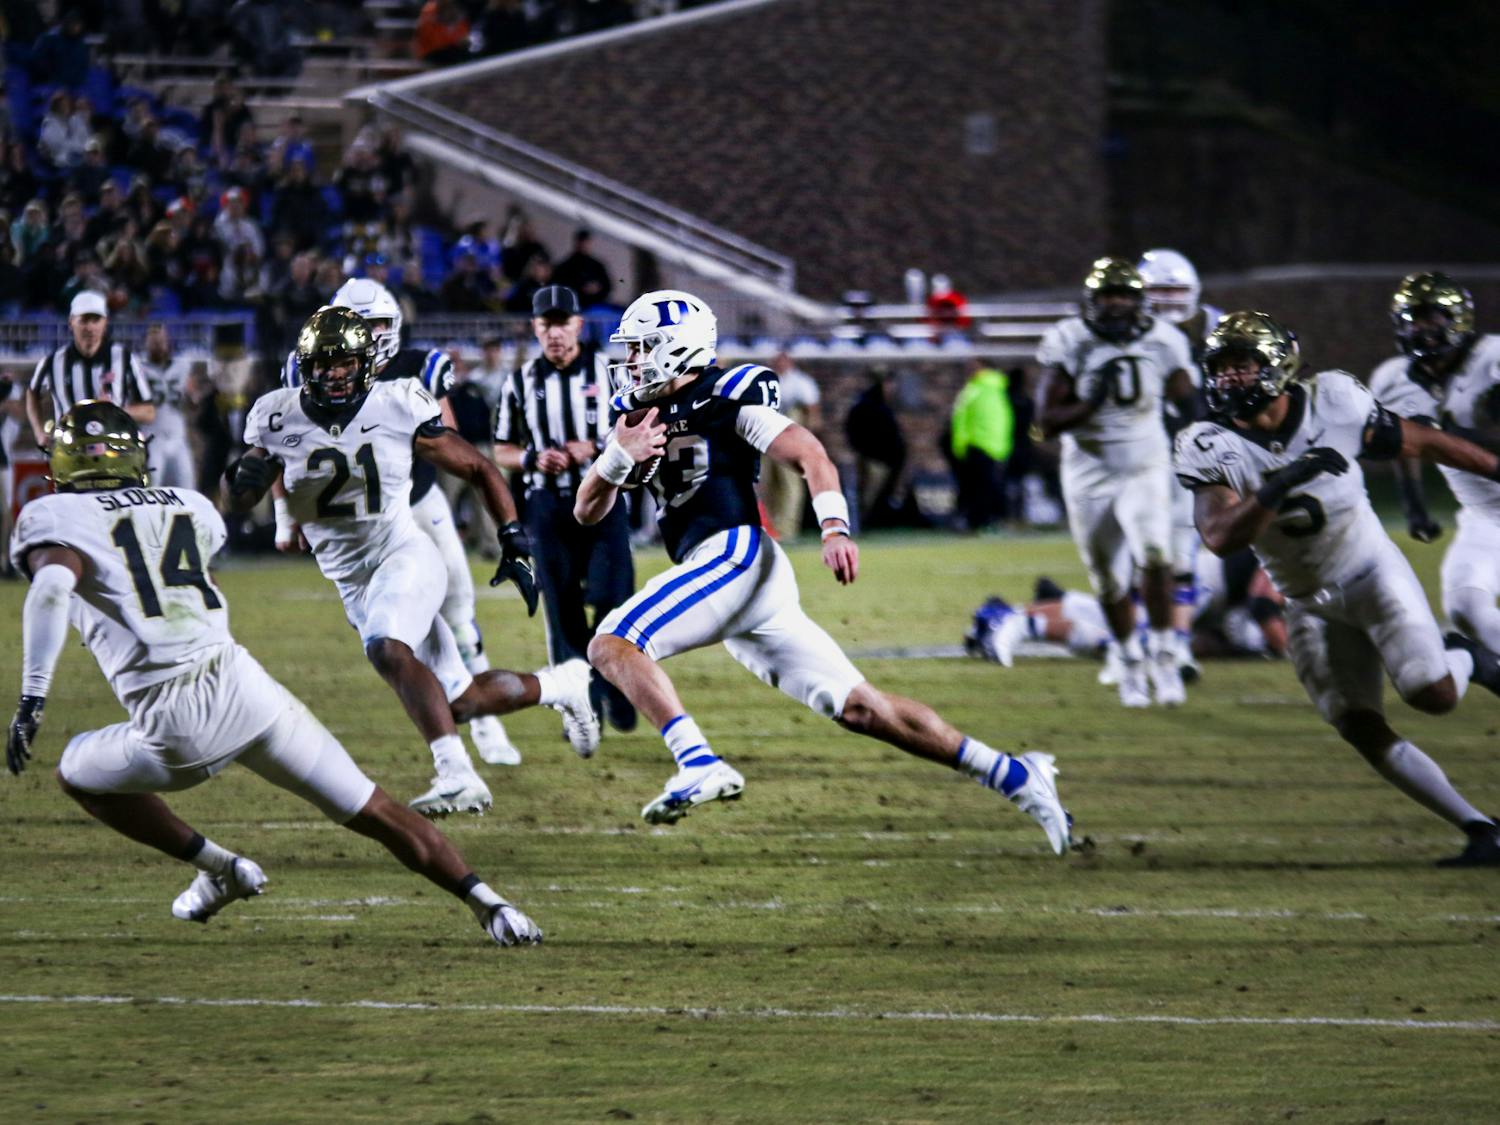 Riley Leonard engineered a game-winning drive for Duke late against Wake Forest.